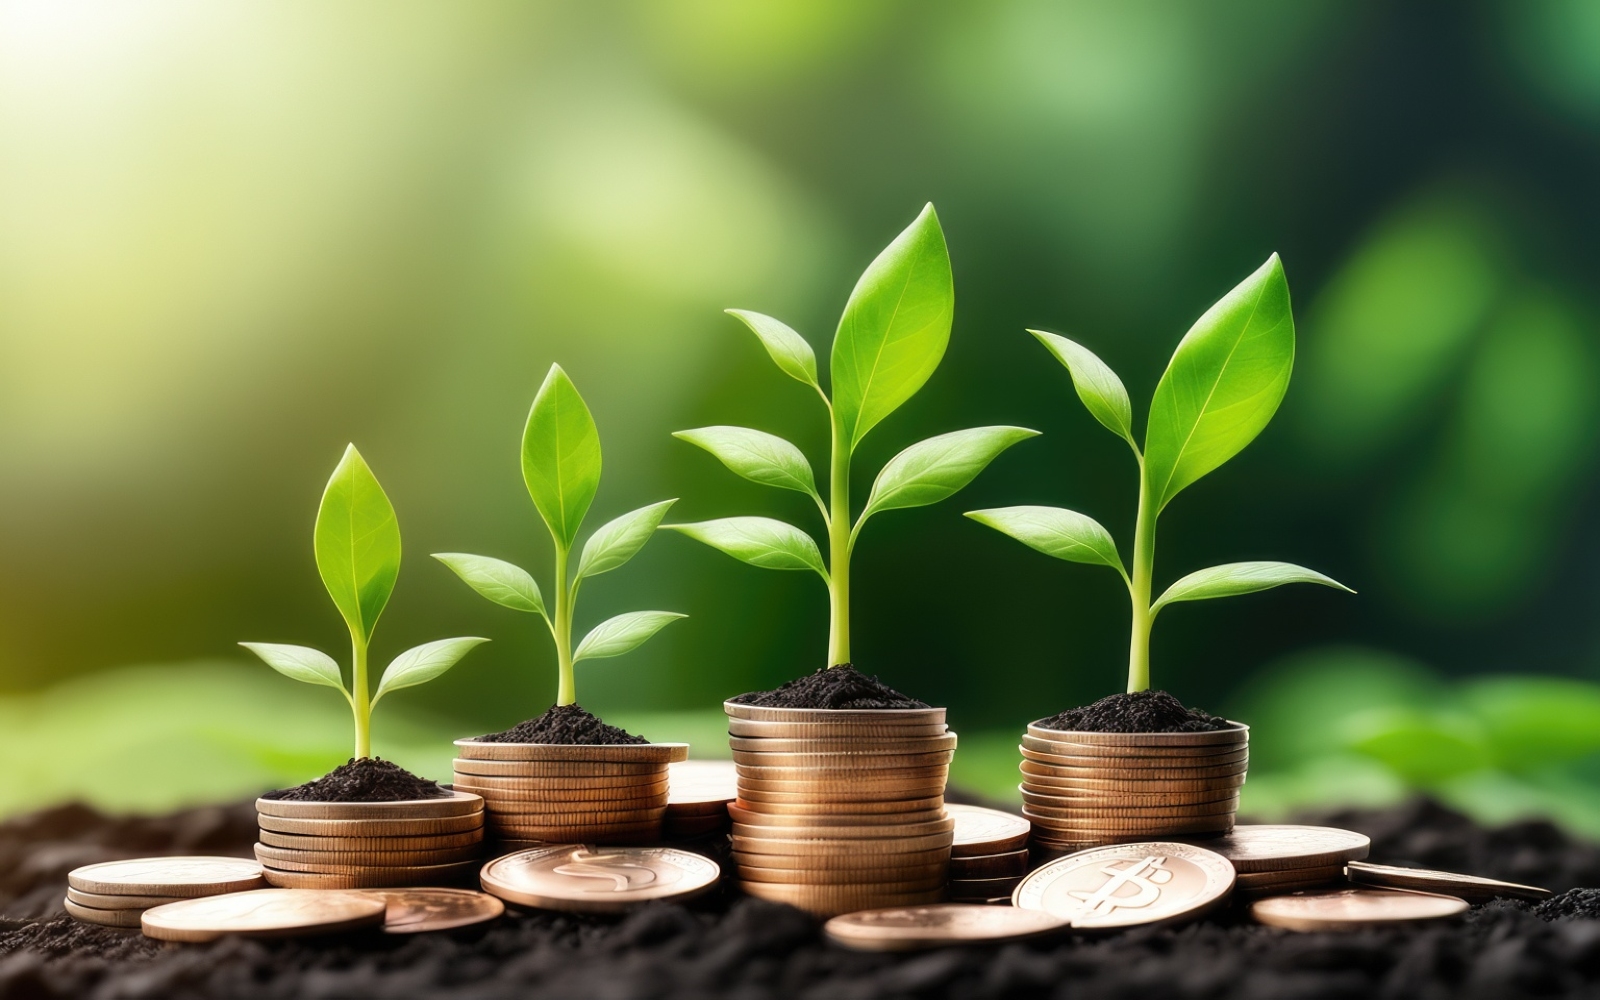 Premium Business Growing Plants on Coins Stacked on Green Blurred Background 21